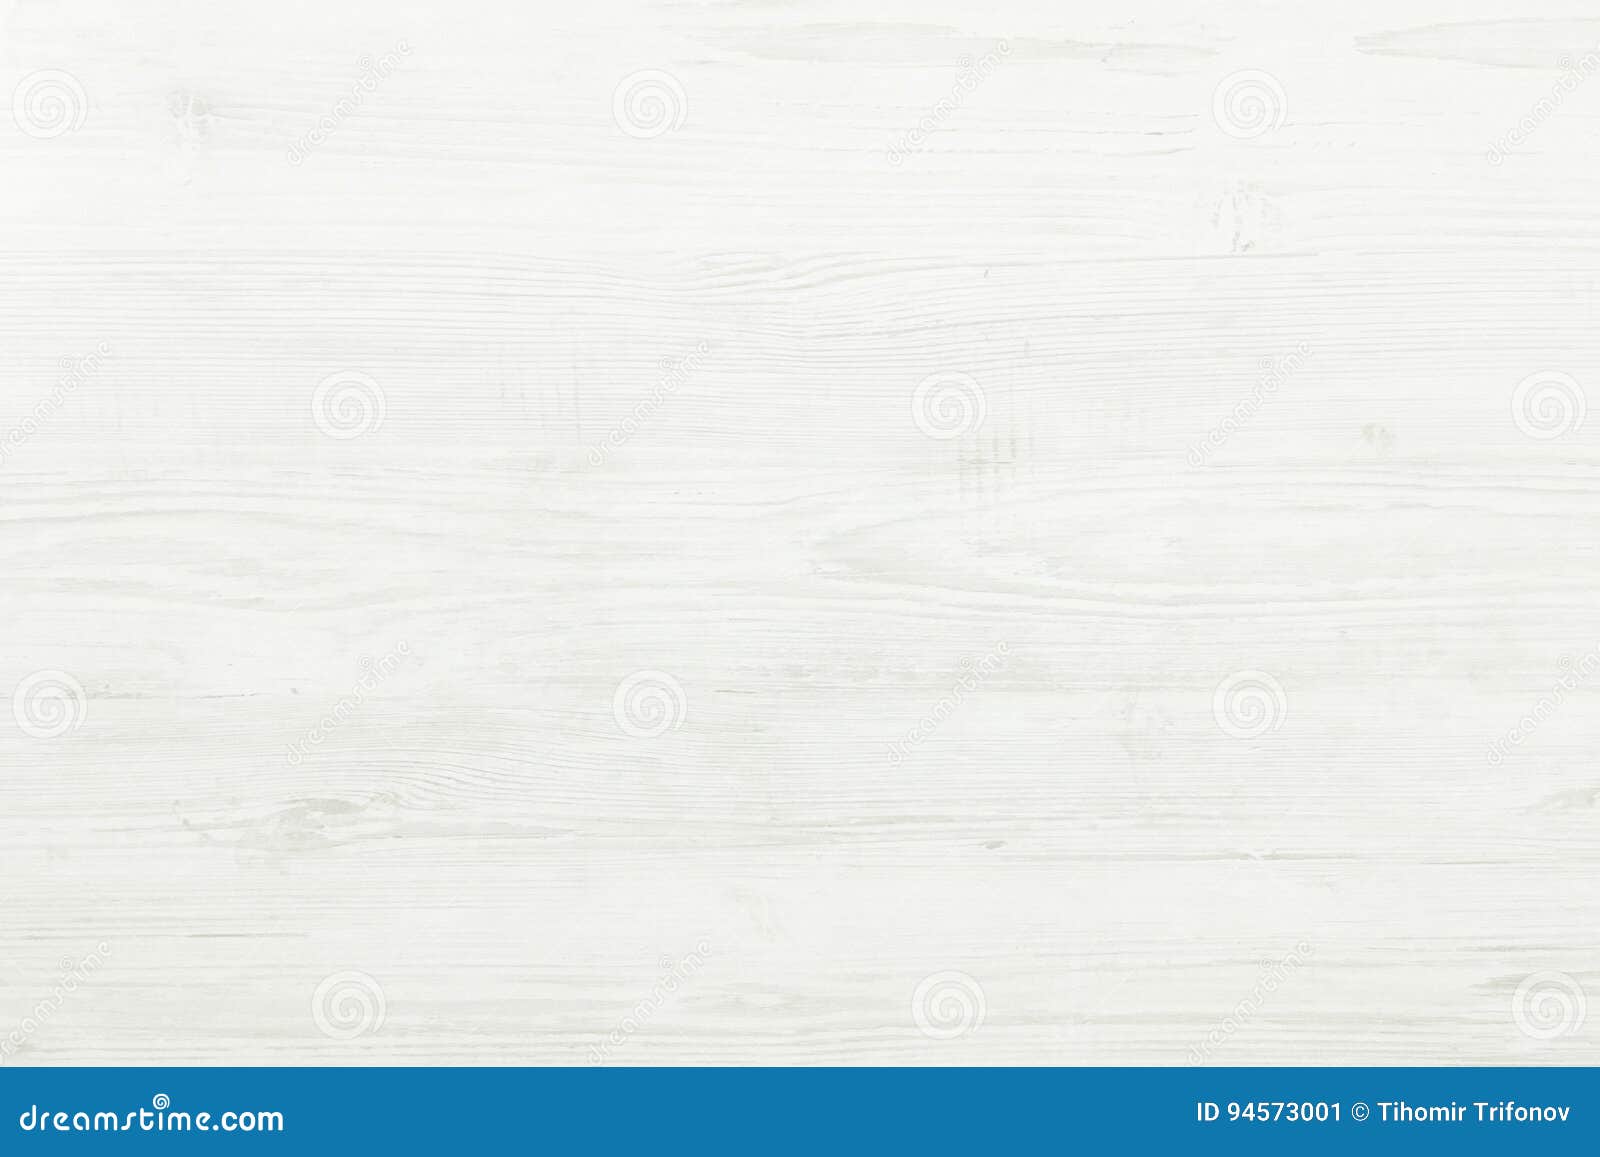 white organic wood texture. light wooden background. old washed wood